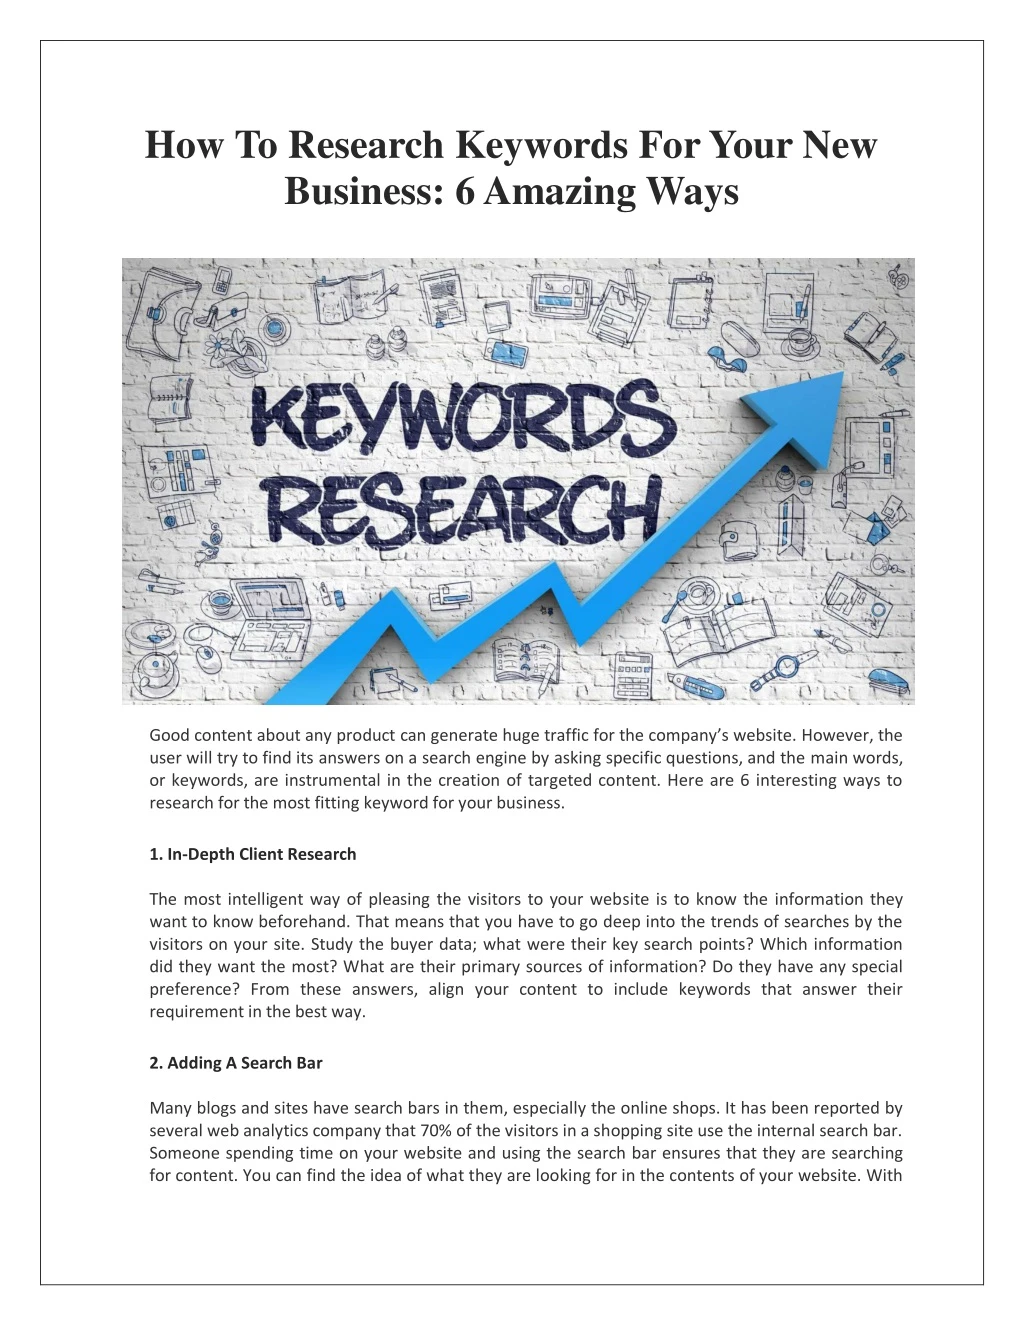 how to research keywords for your new business